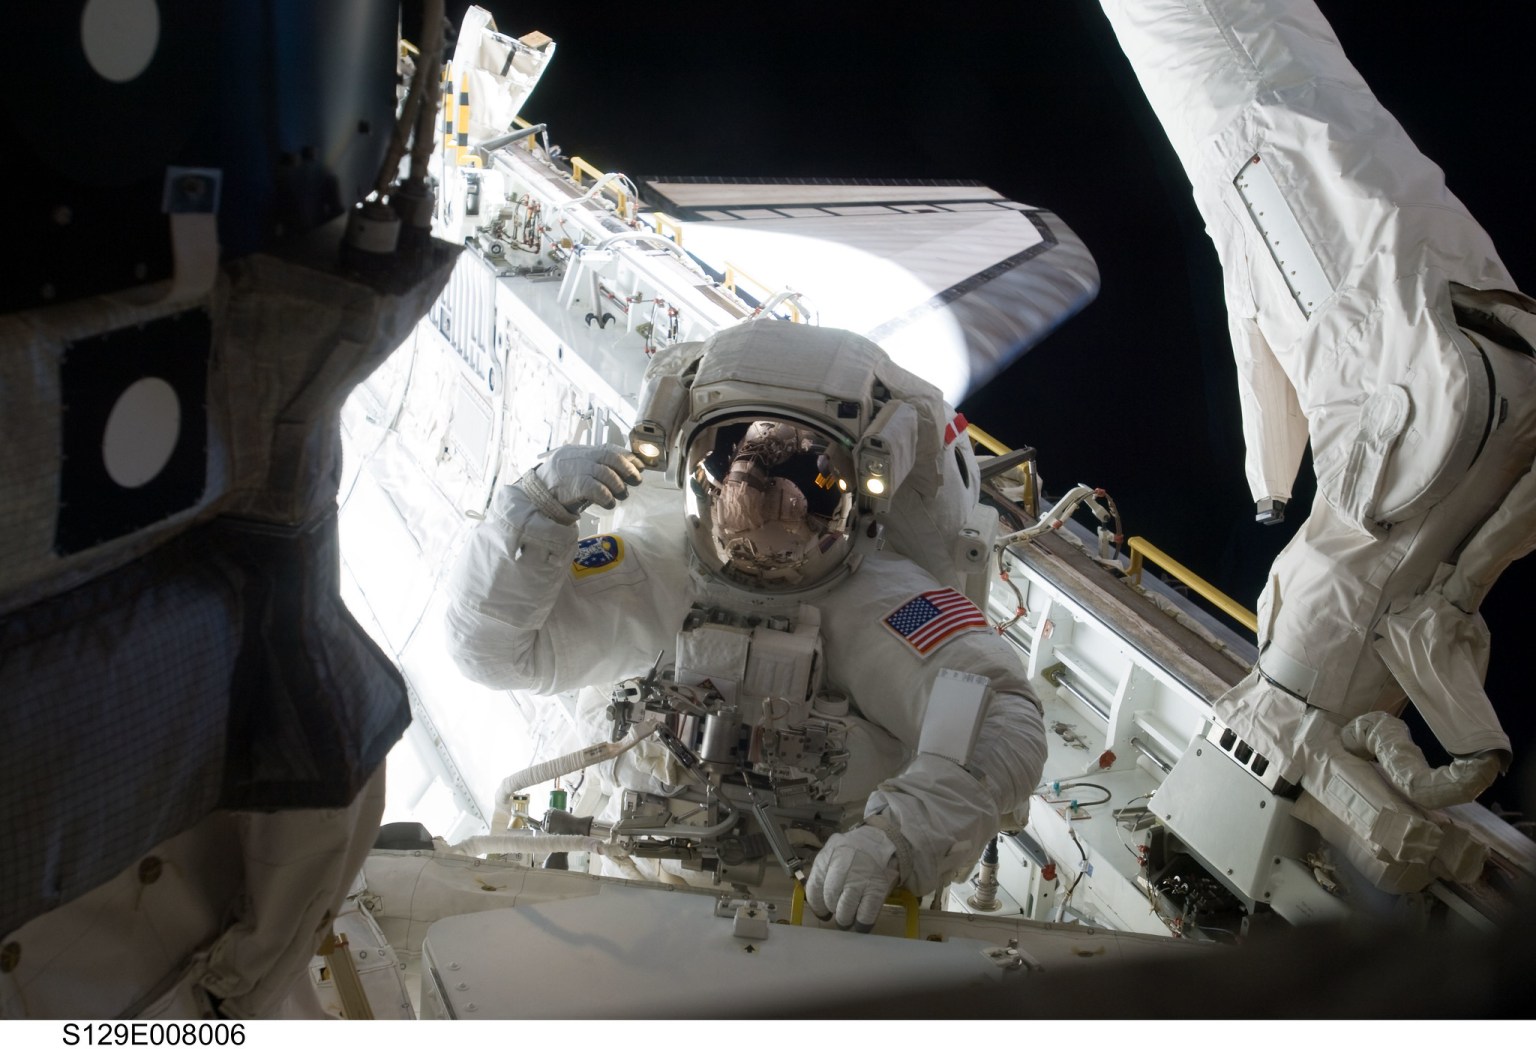  November 2009) Astronaut Randy Bresnik, STS-129 mission specialist, participates in the mission's third and final session of extravehicular activity (EVA) as construction and maintenance continue on the International Space Station. During the five-hour, 42-minute spacewalk